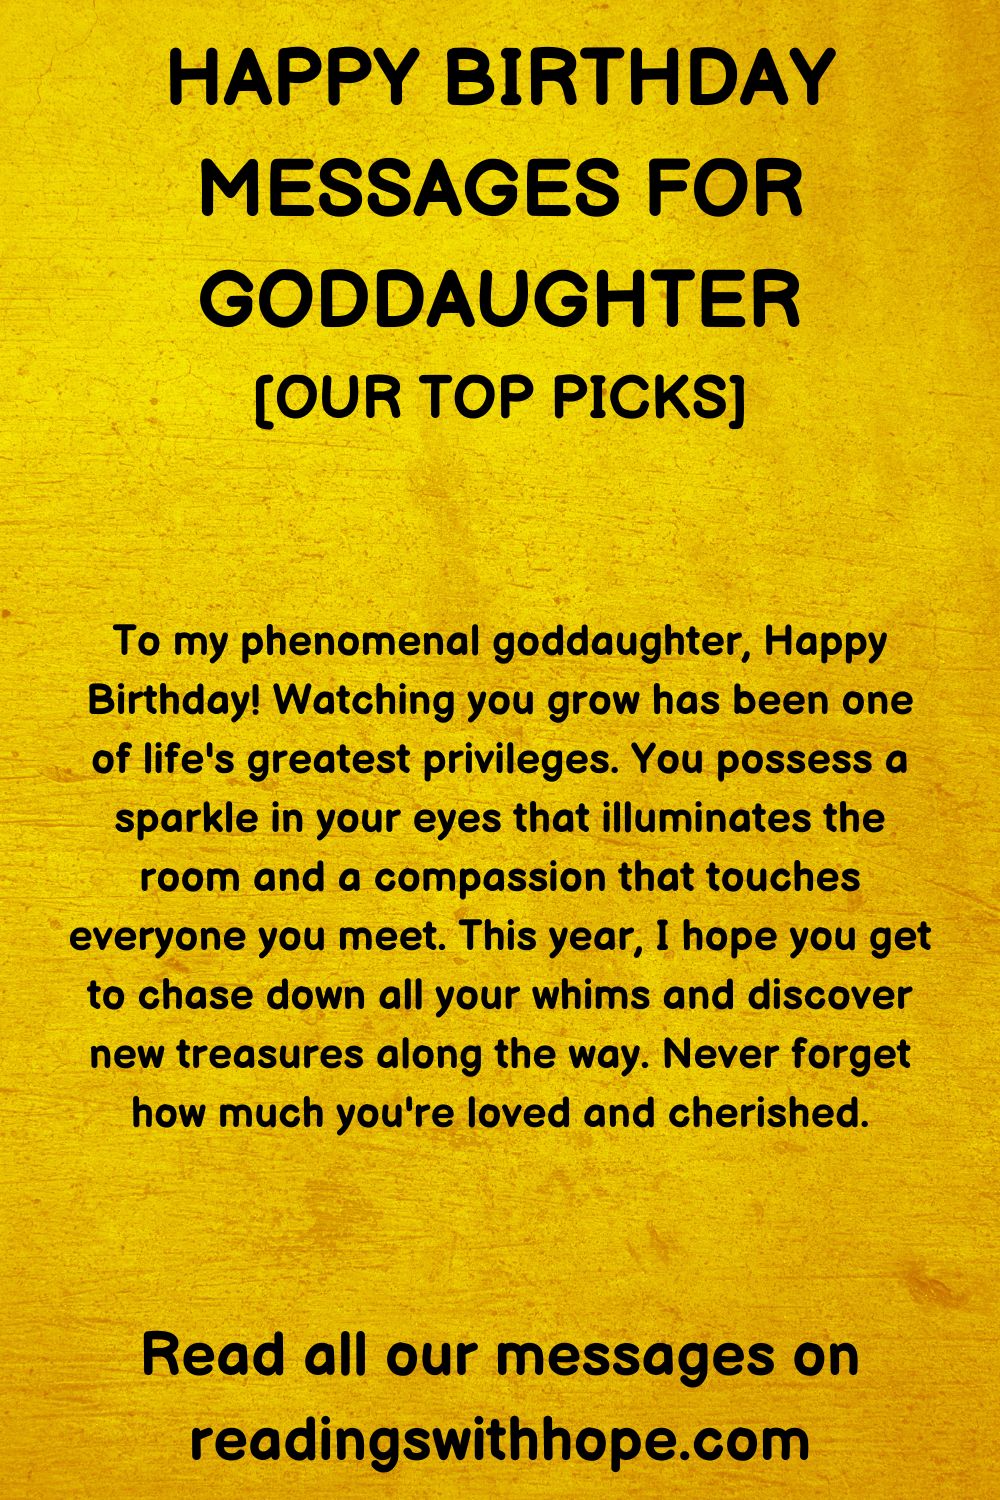 50 Happy Birthday Messages for Goddaughter